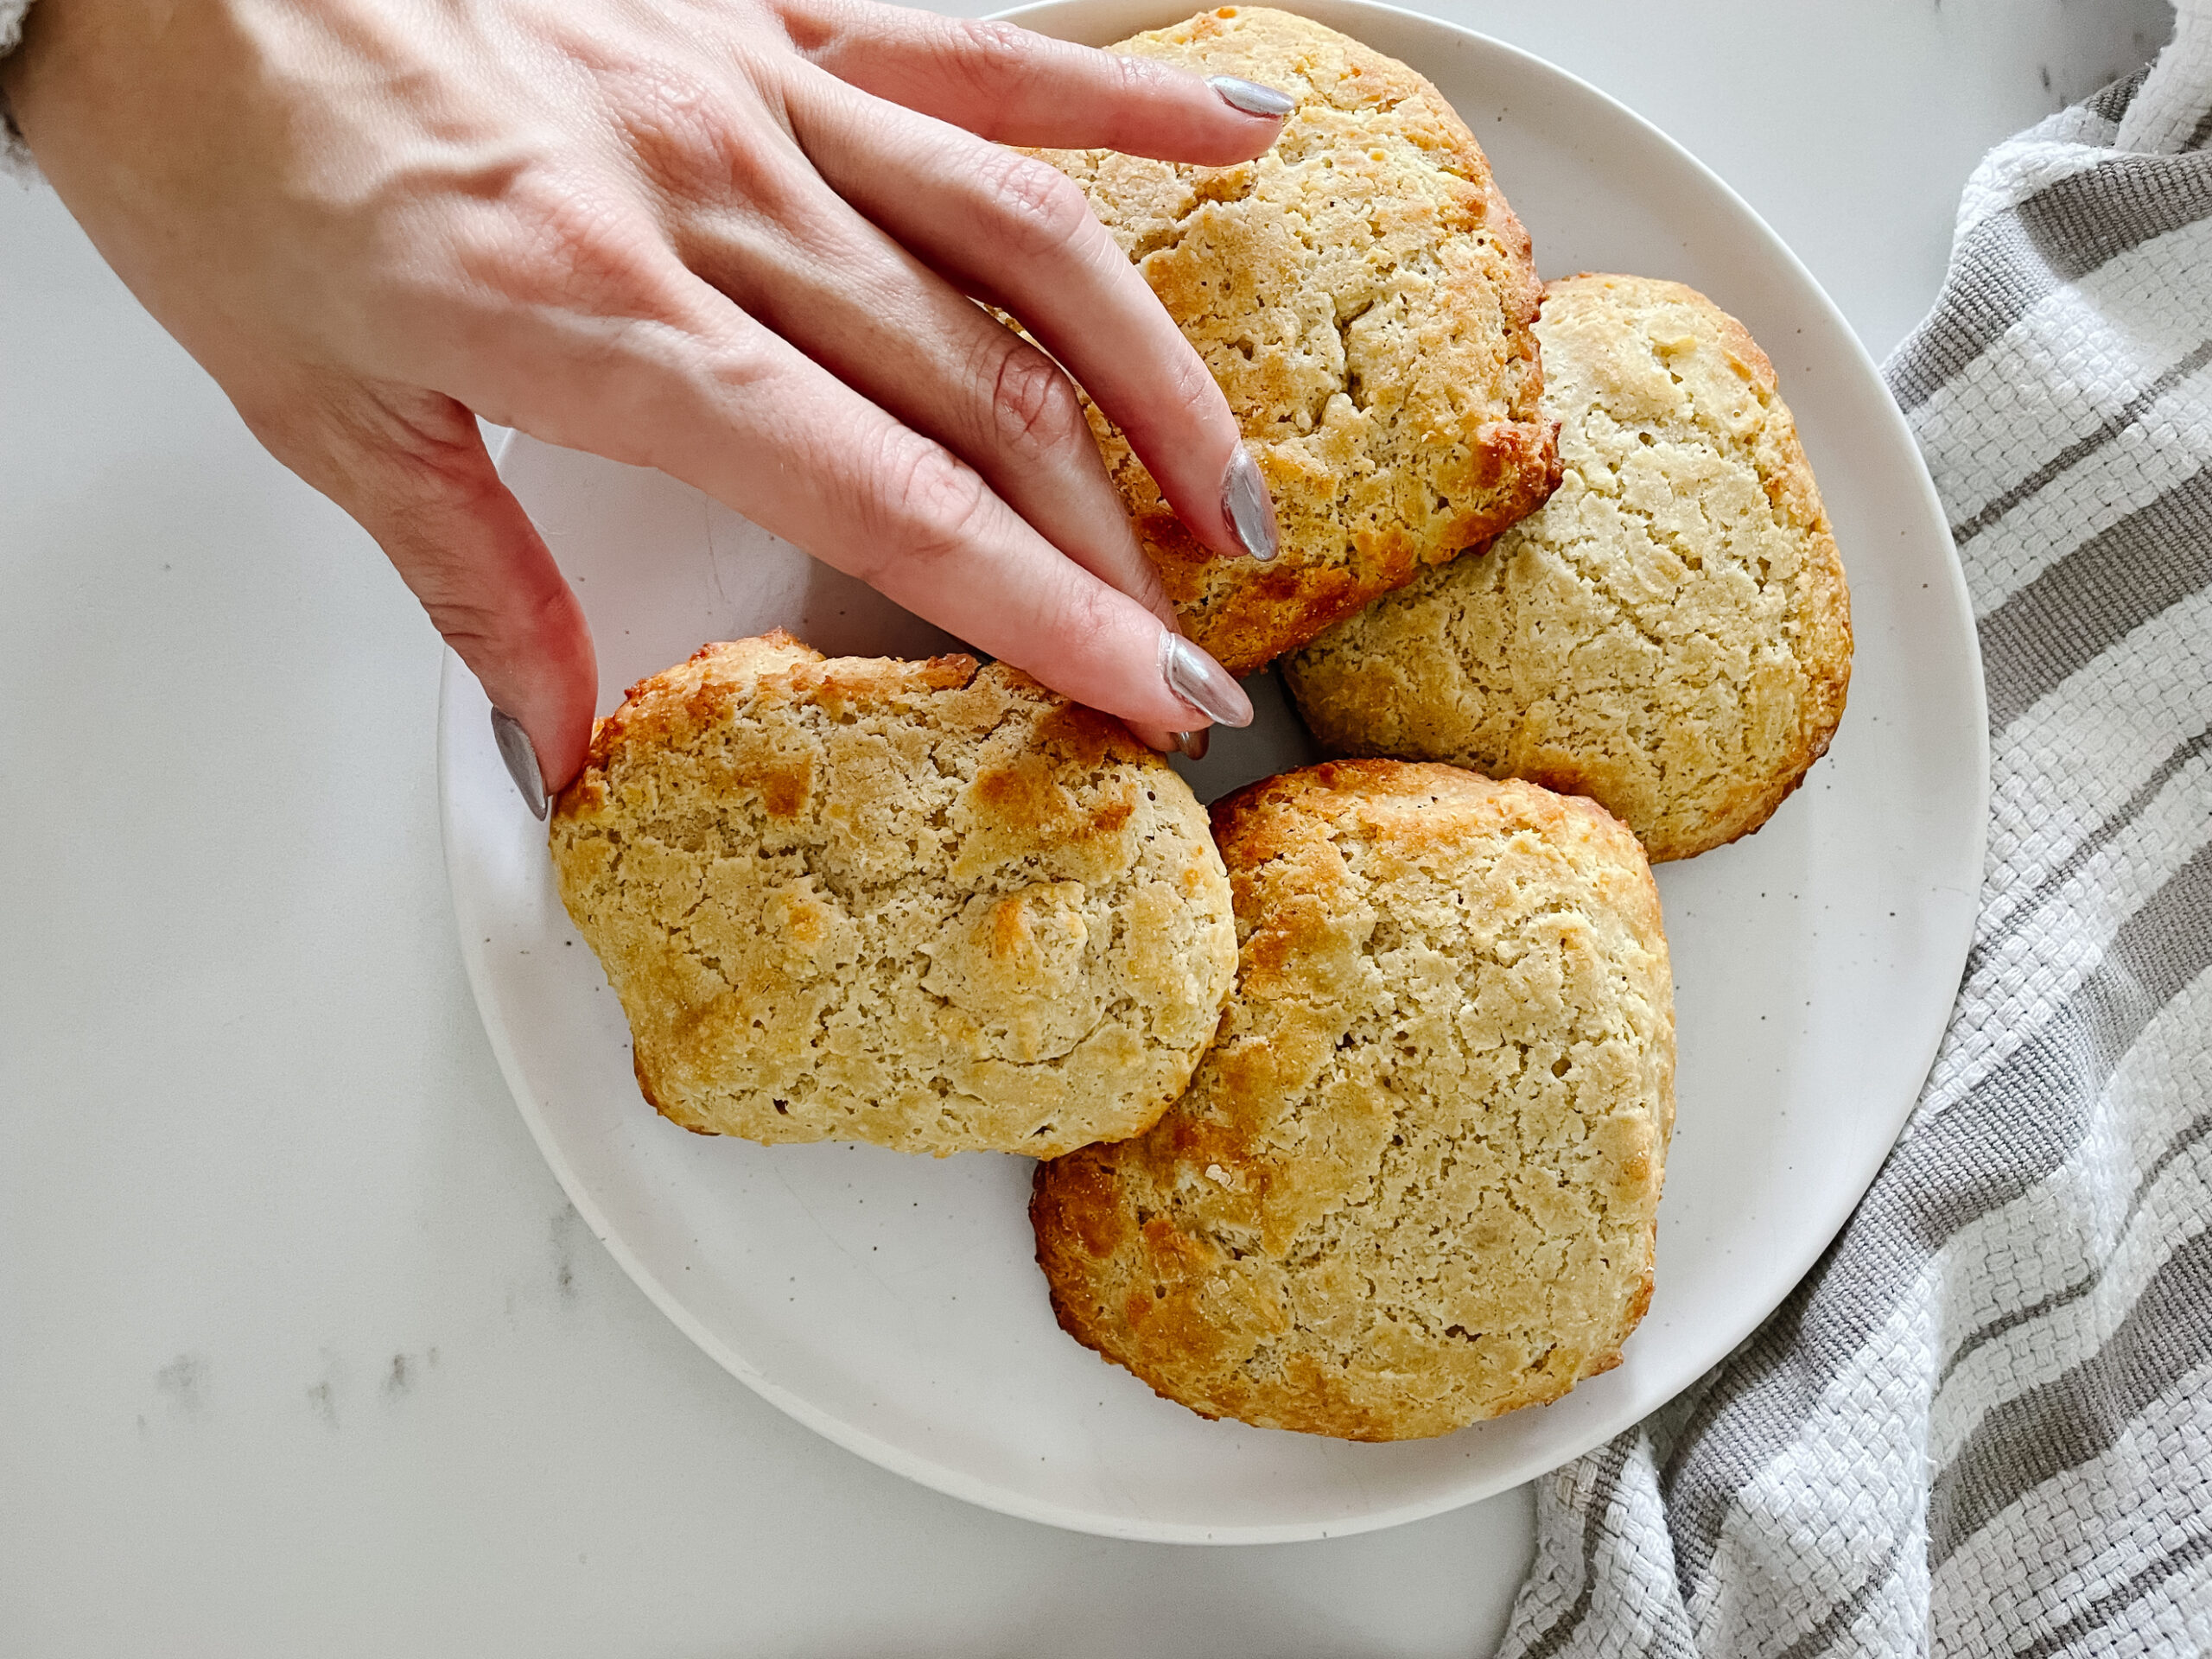 gluten-free biscuits on a plate. one is being picked up by a hand